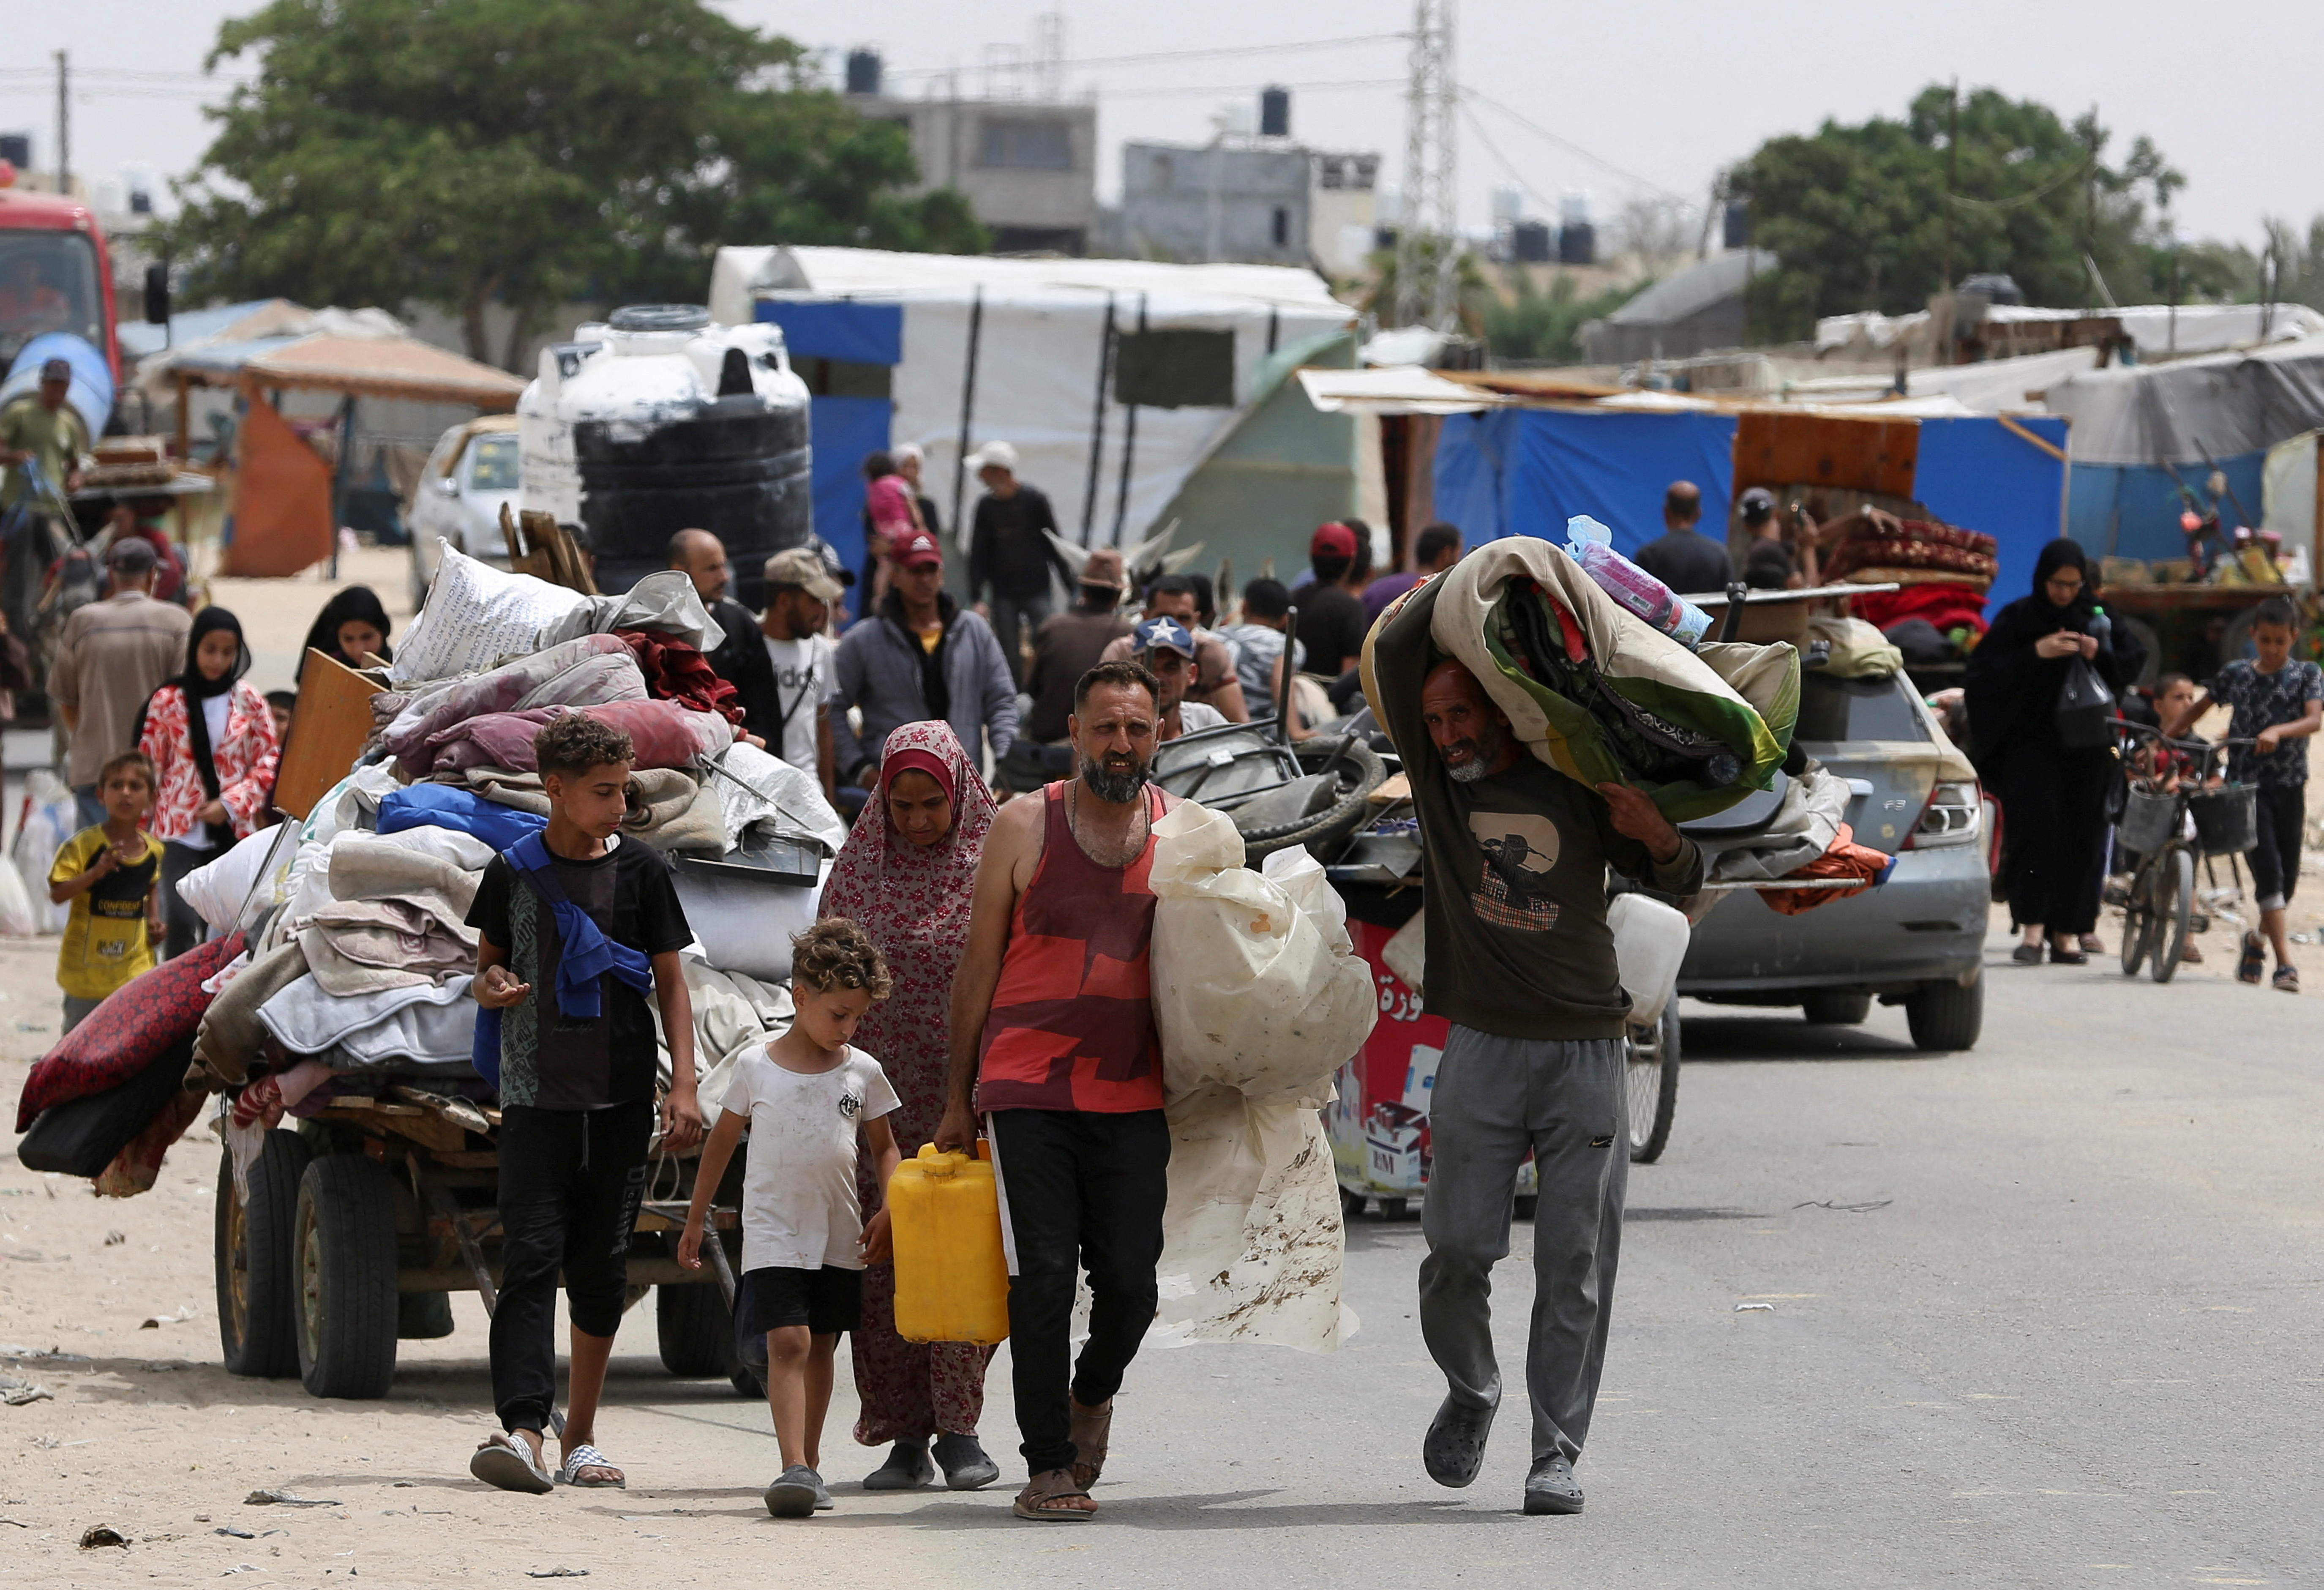 Palestinians travel on foot along with their belongings as they flee Rafah due to an Israeli military operation